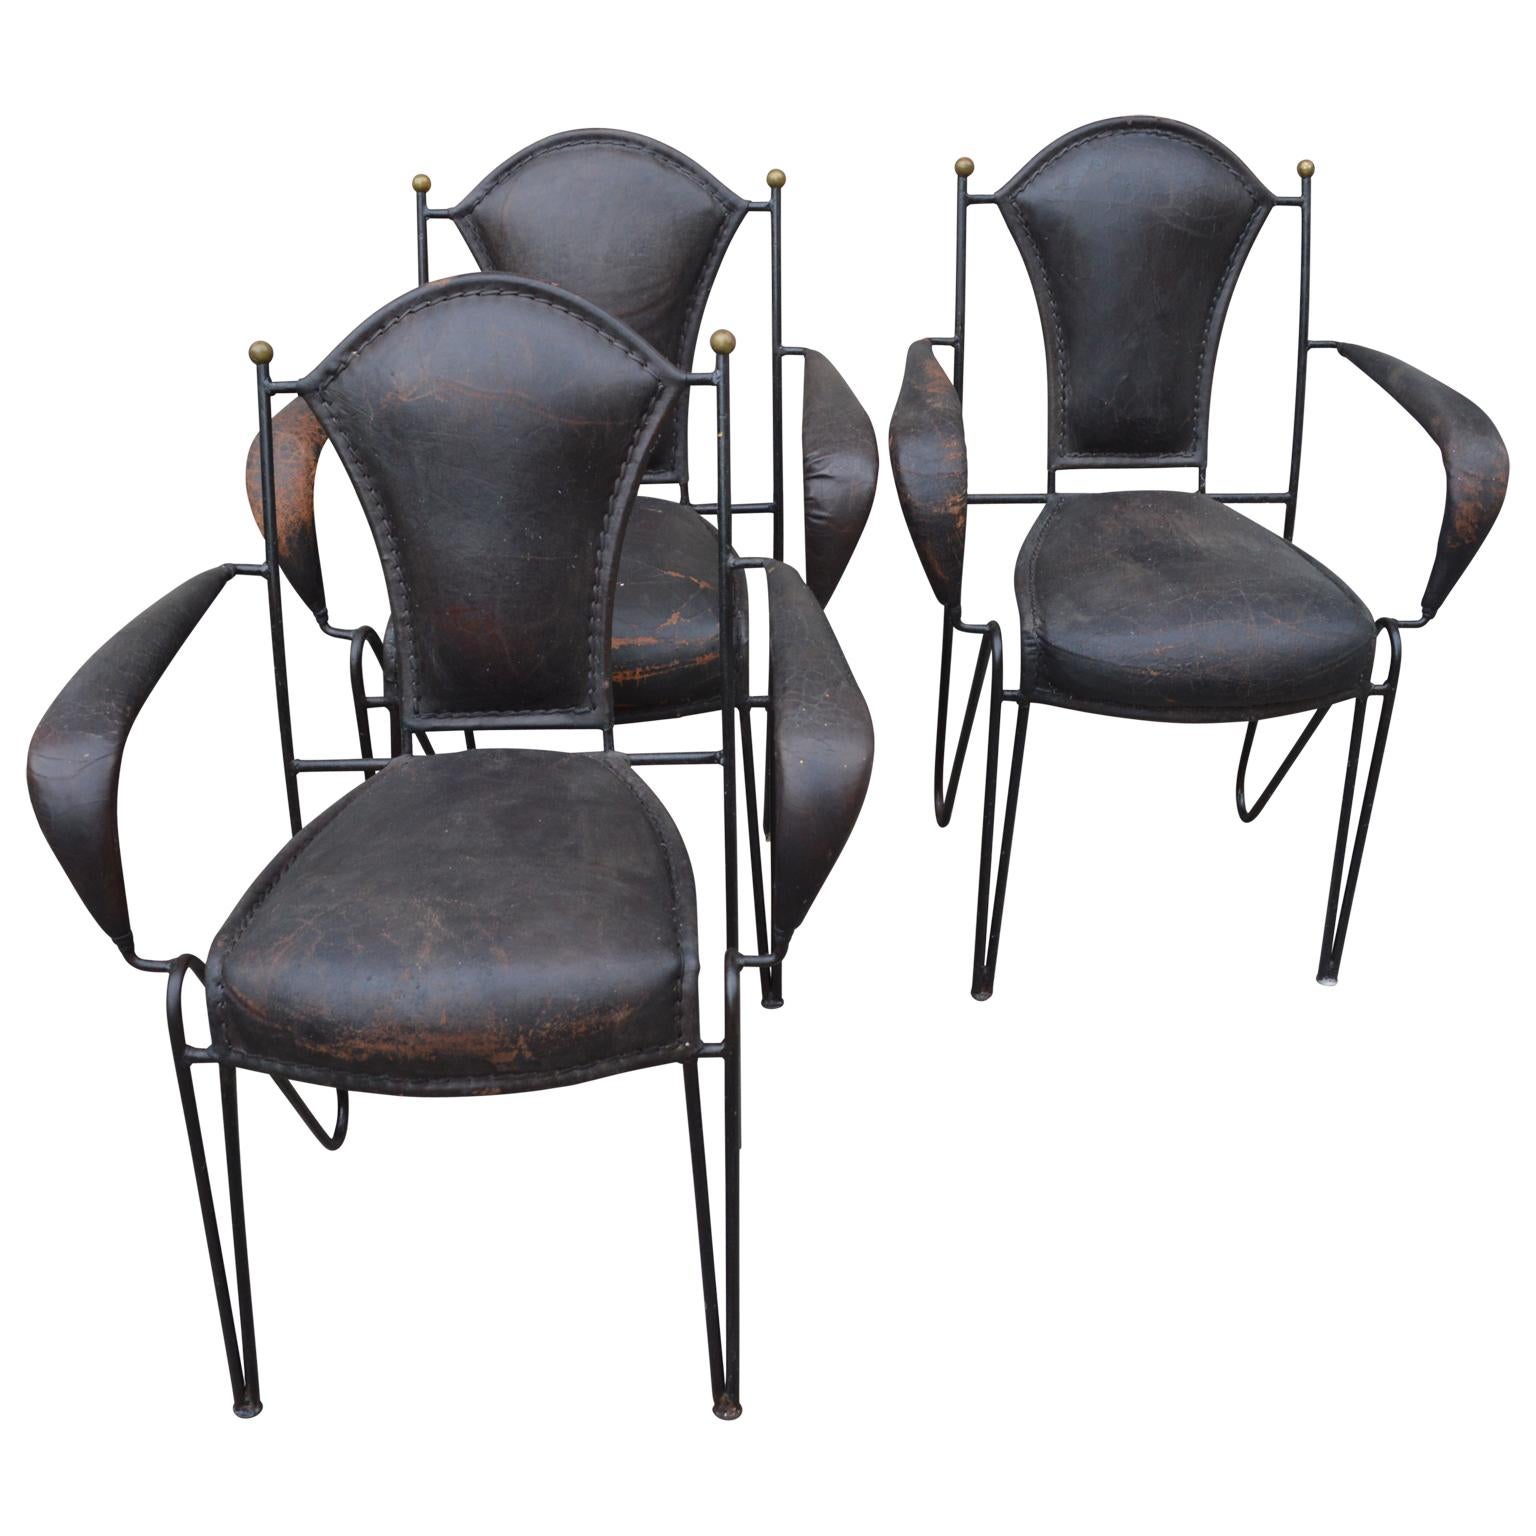 20th Century Four French 1950s Stitched Leather Patio Armchairs By Jacques Adnet